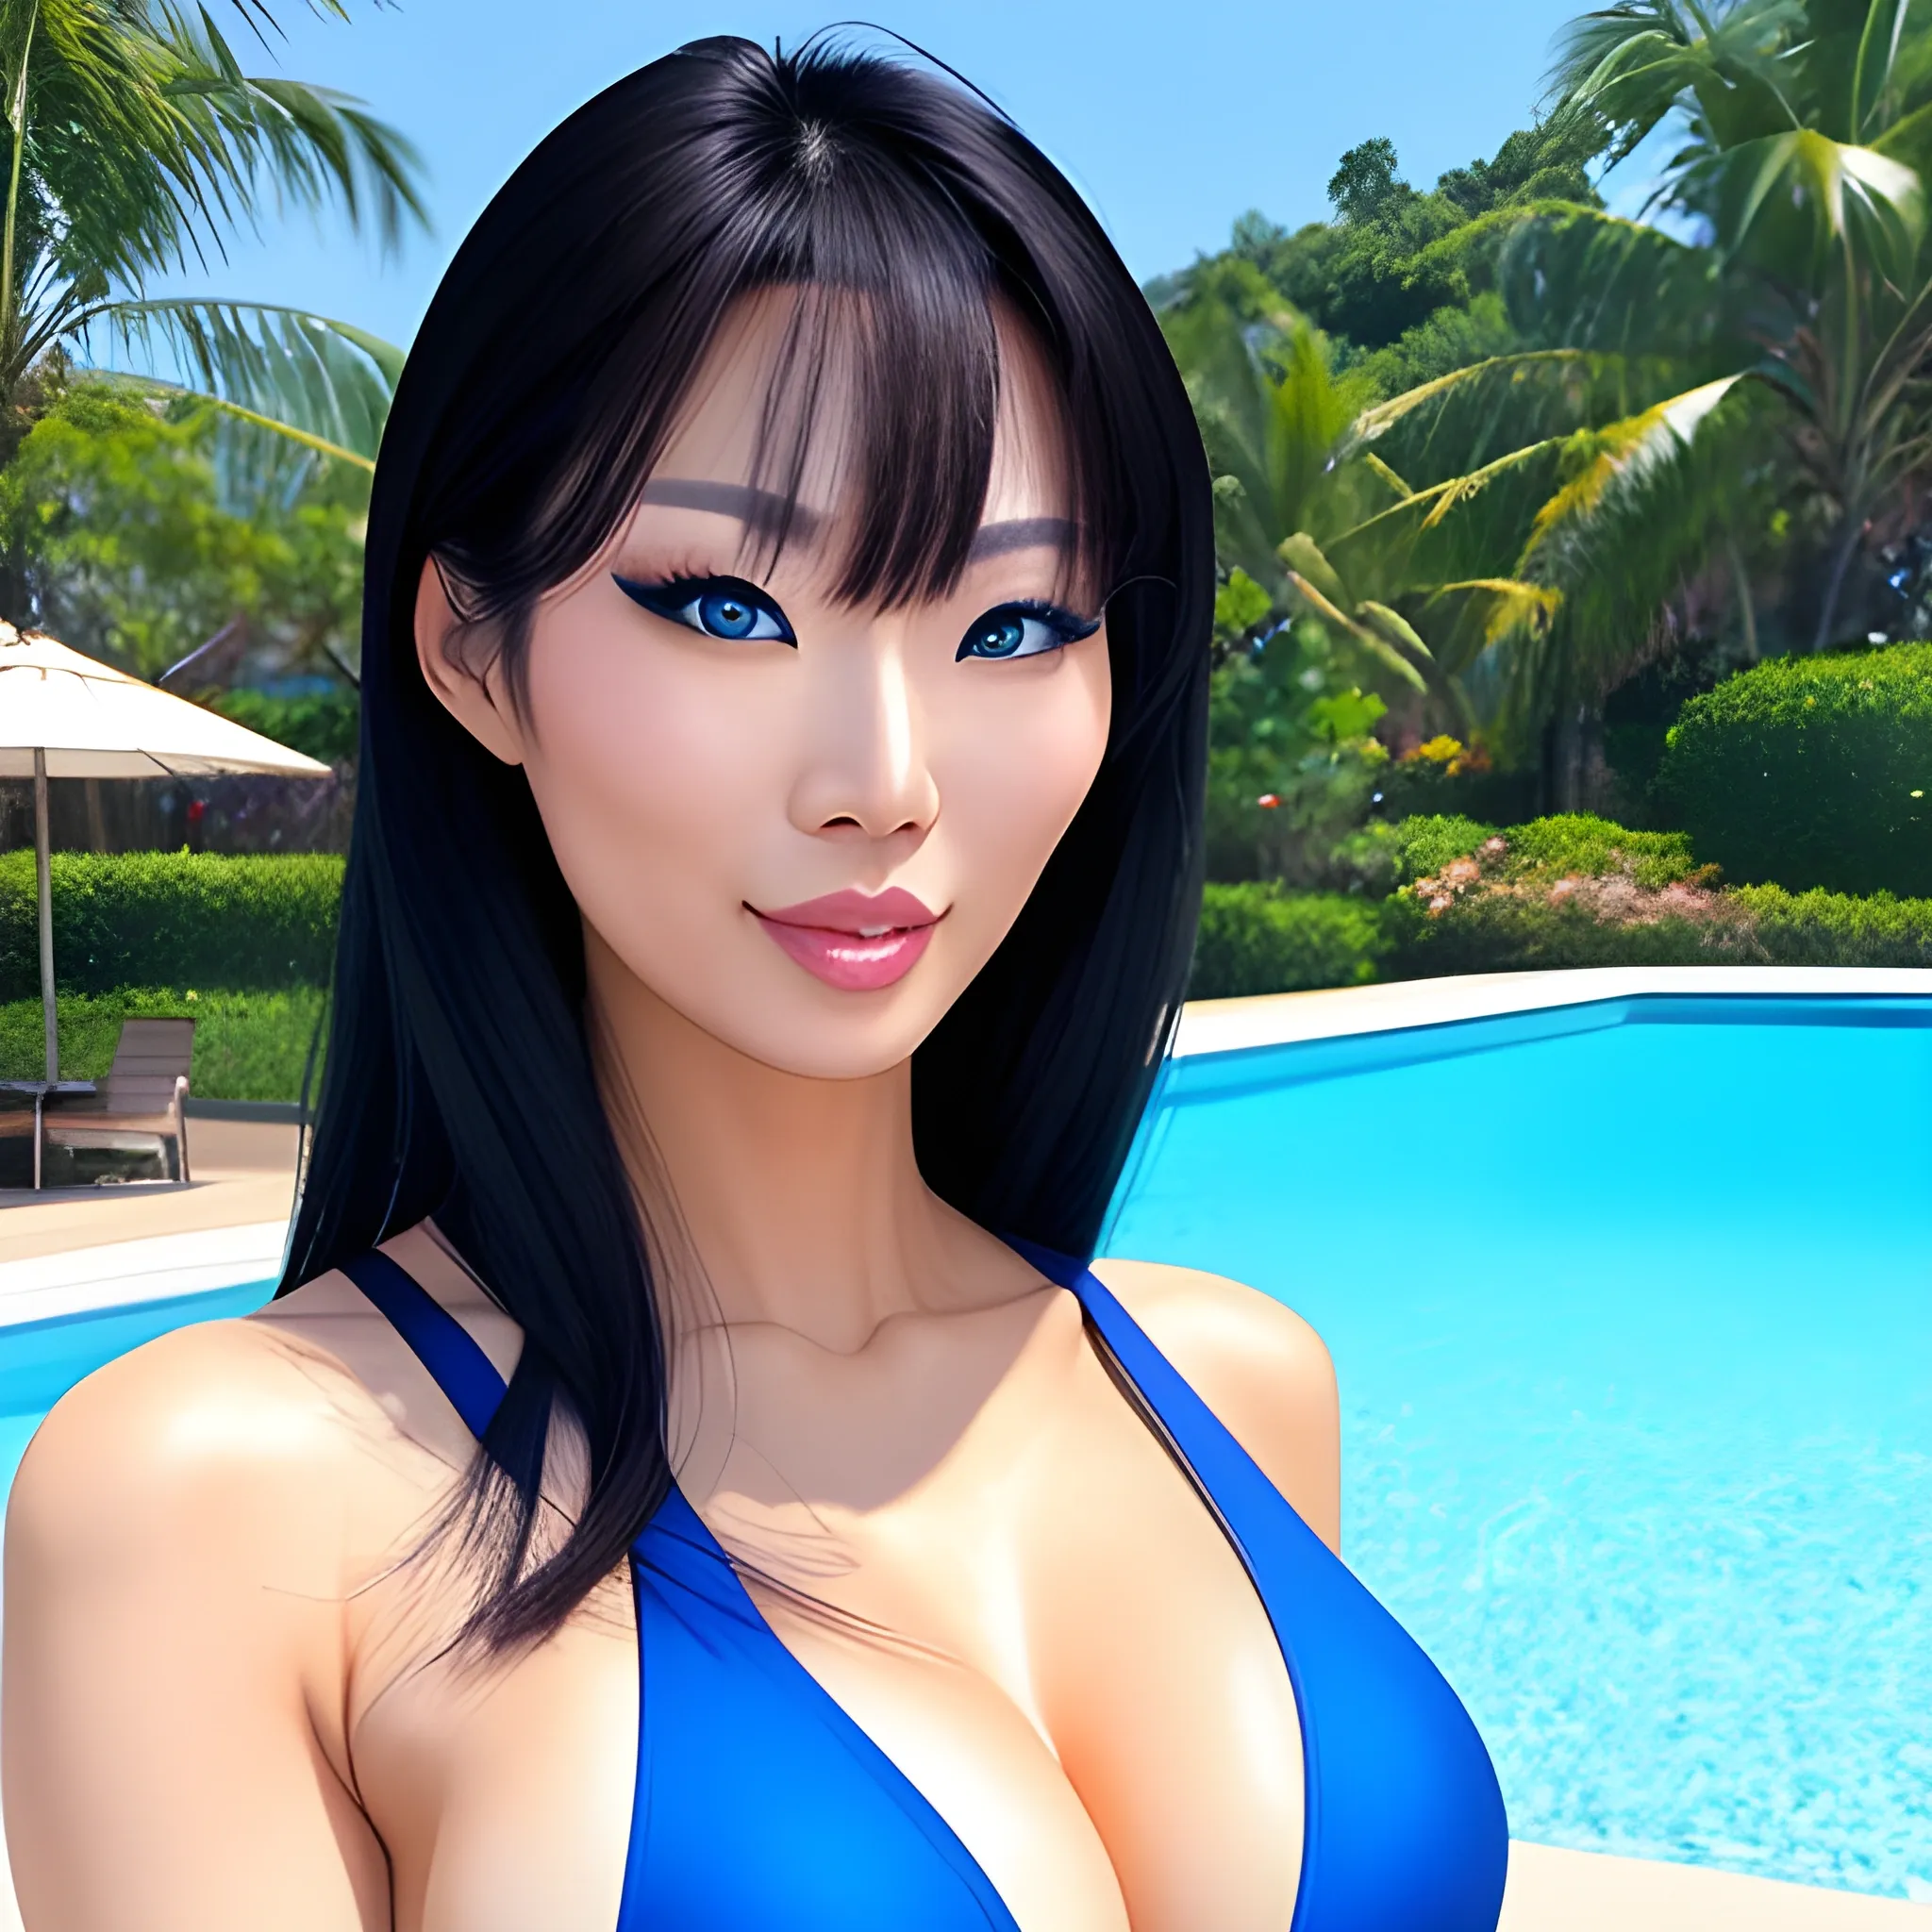 a sexy asian girl. Looking at camera, with blue eyes. And using a swimsuit. in a nice day.
you must be realistic and creative.